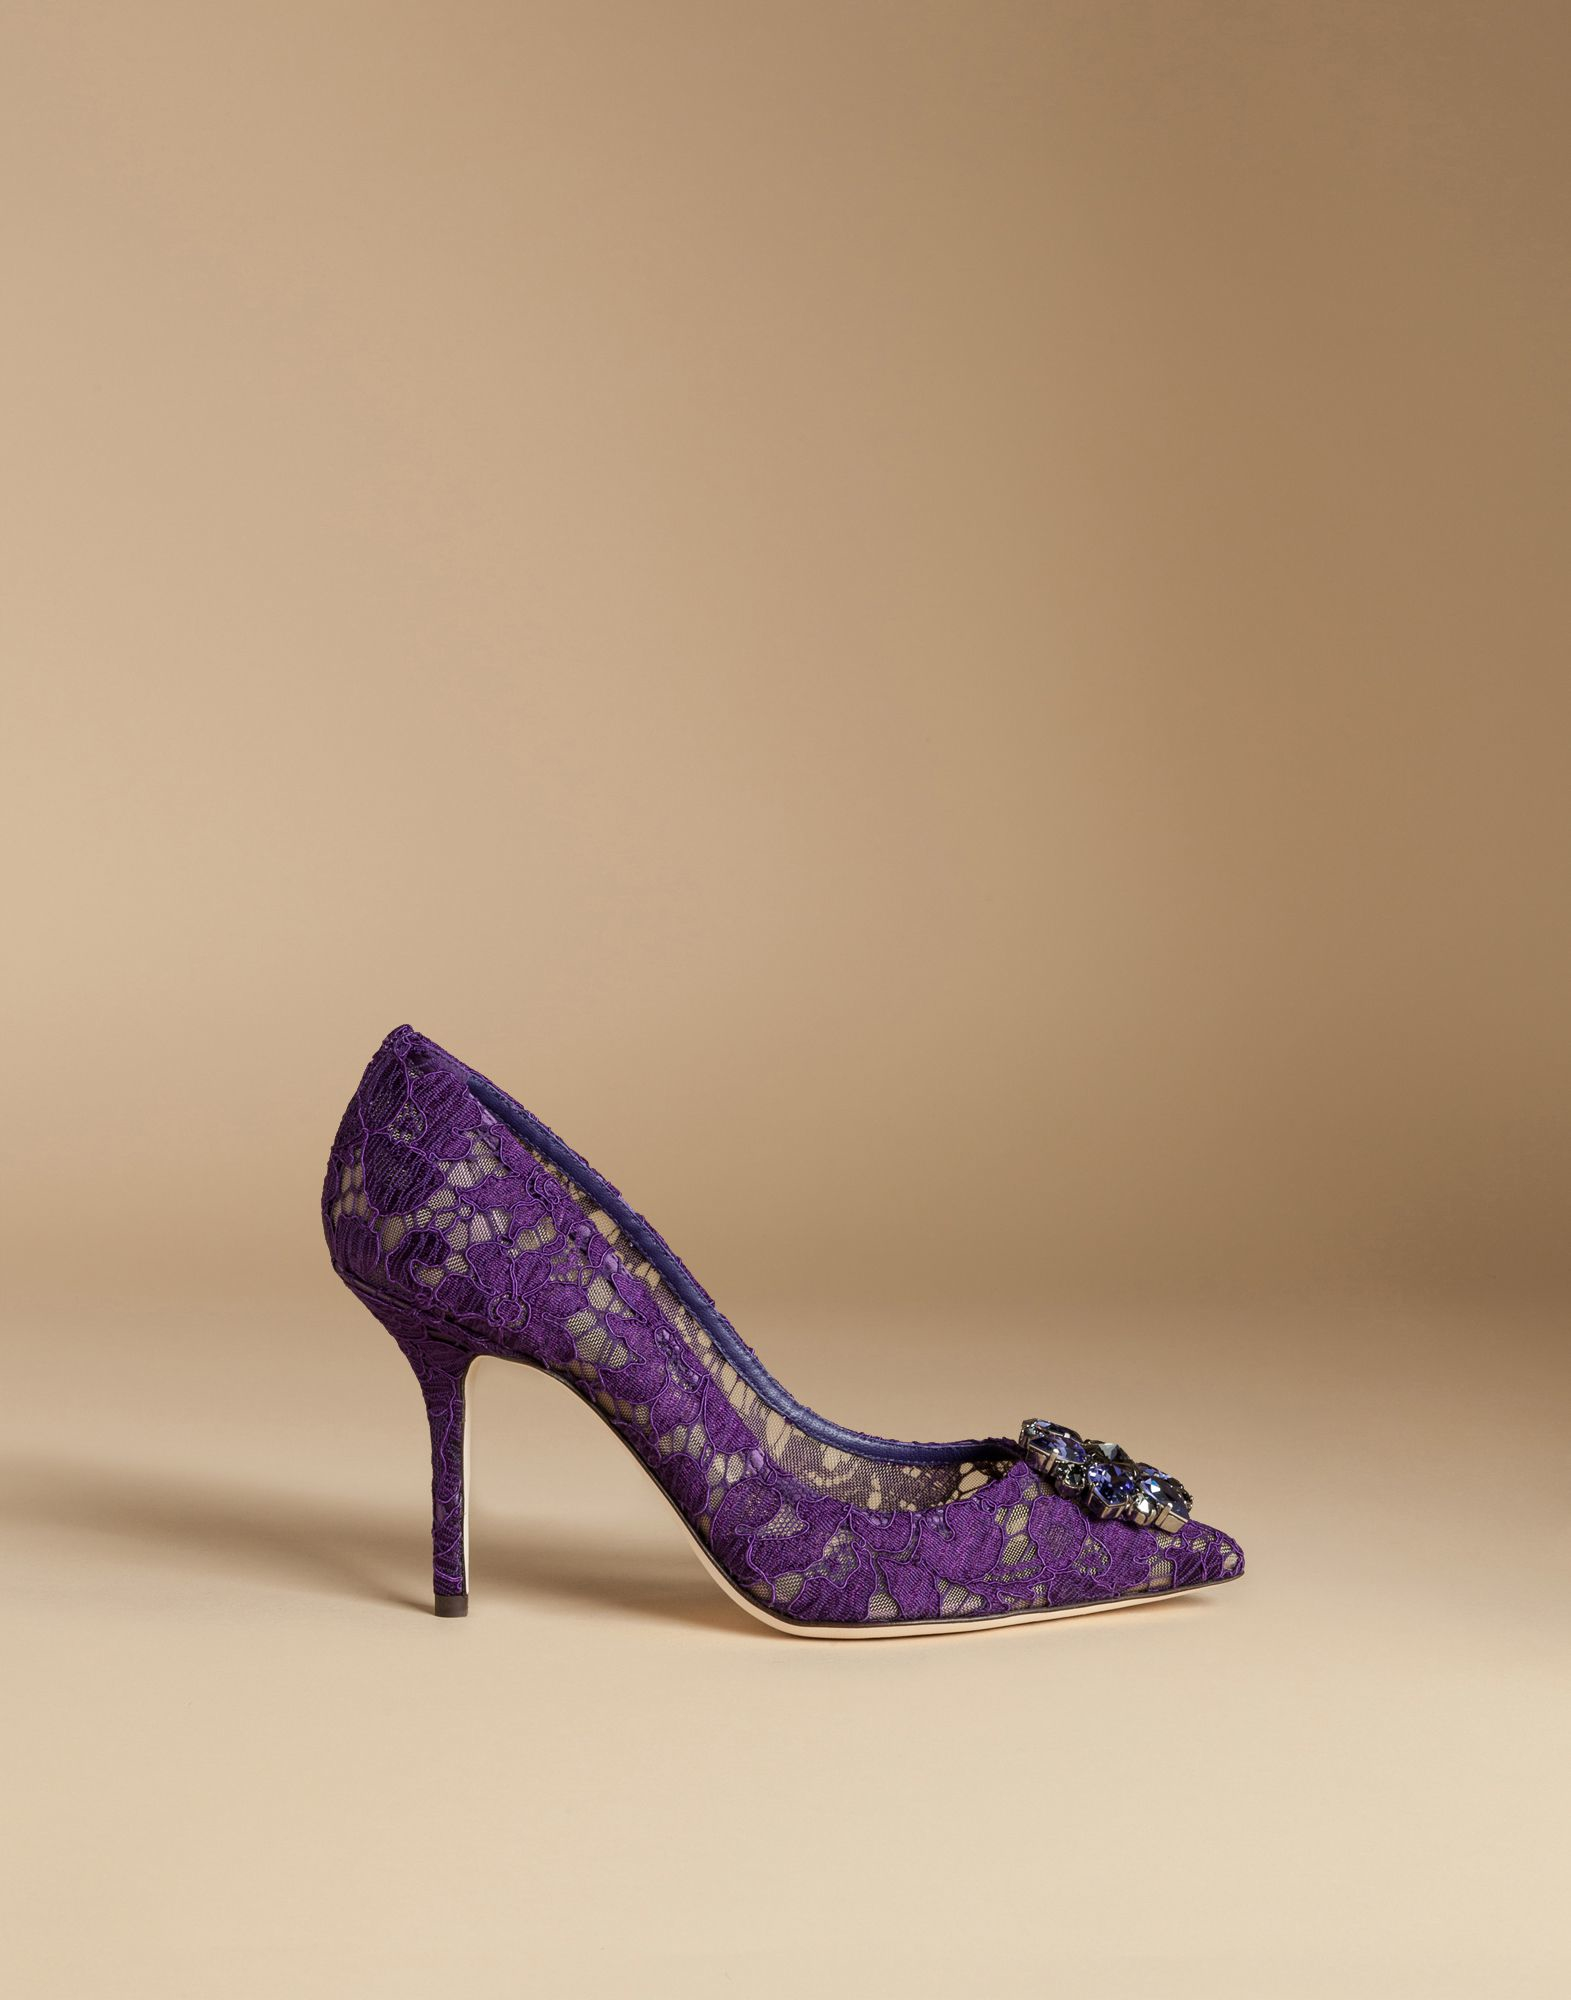 dolce and gabbana purple shoes